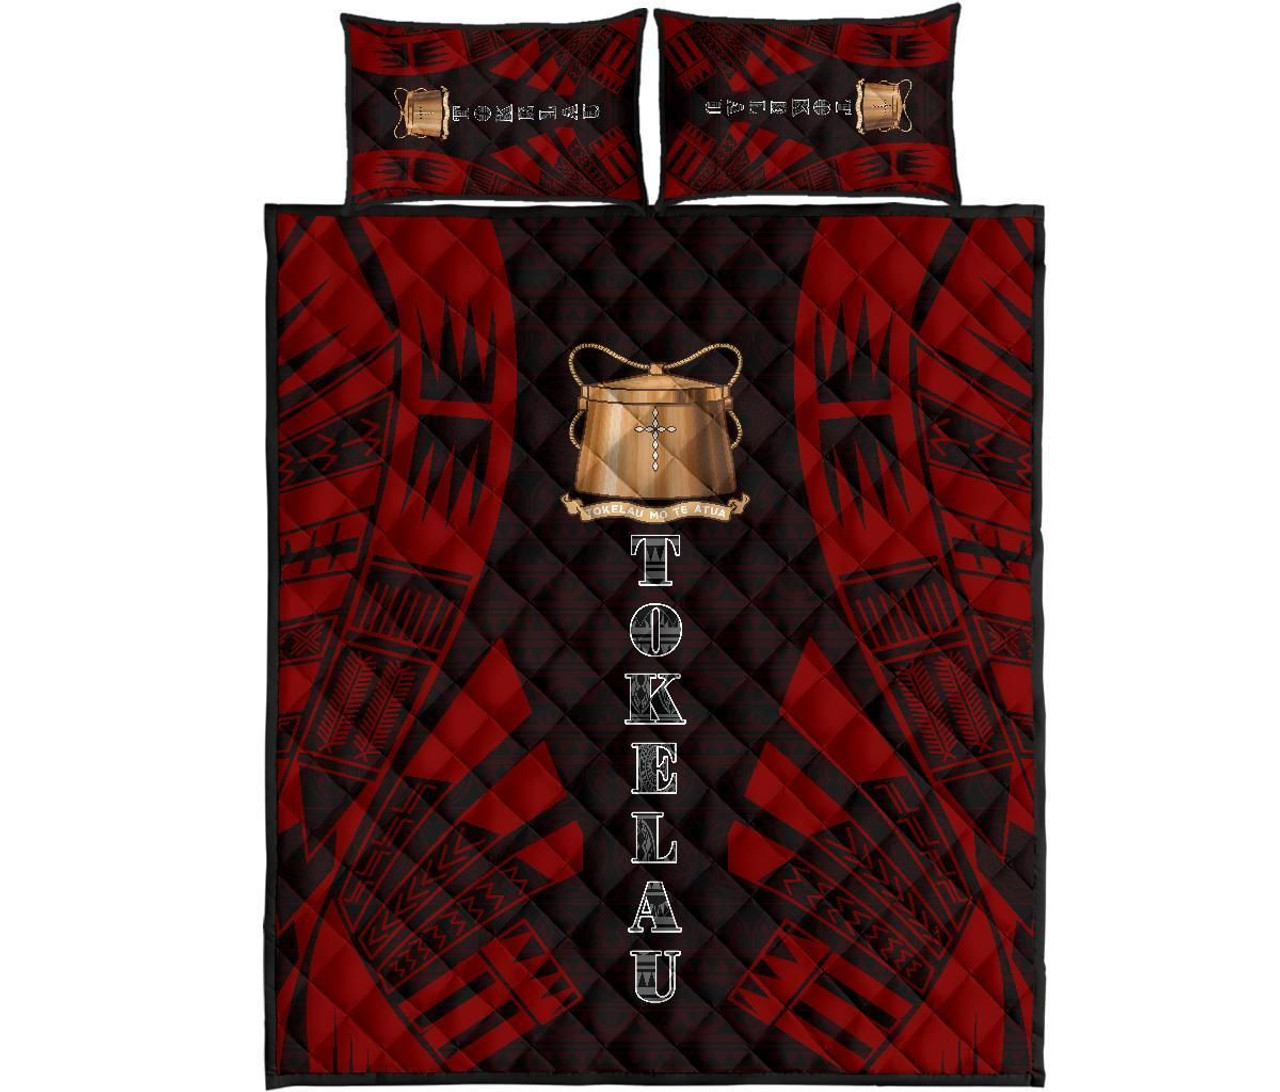 Tokelau Quilt Bed Set - Tokelau Coat Of Arms Red Tattoo Style 1